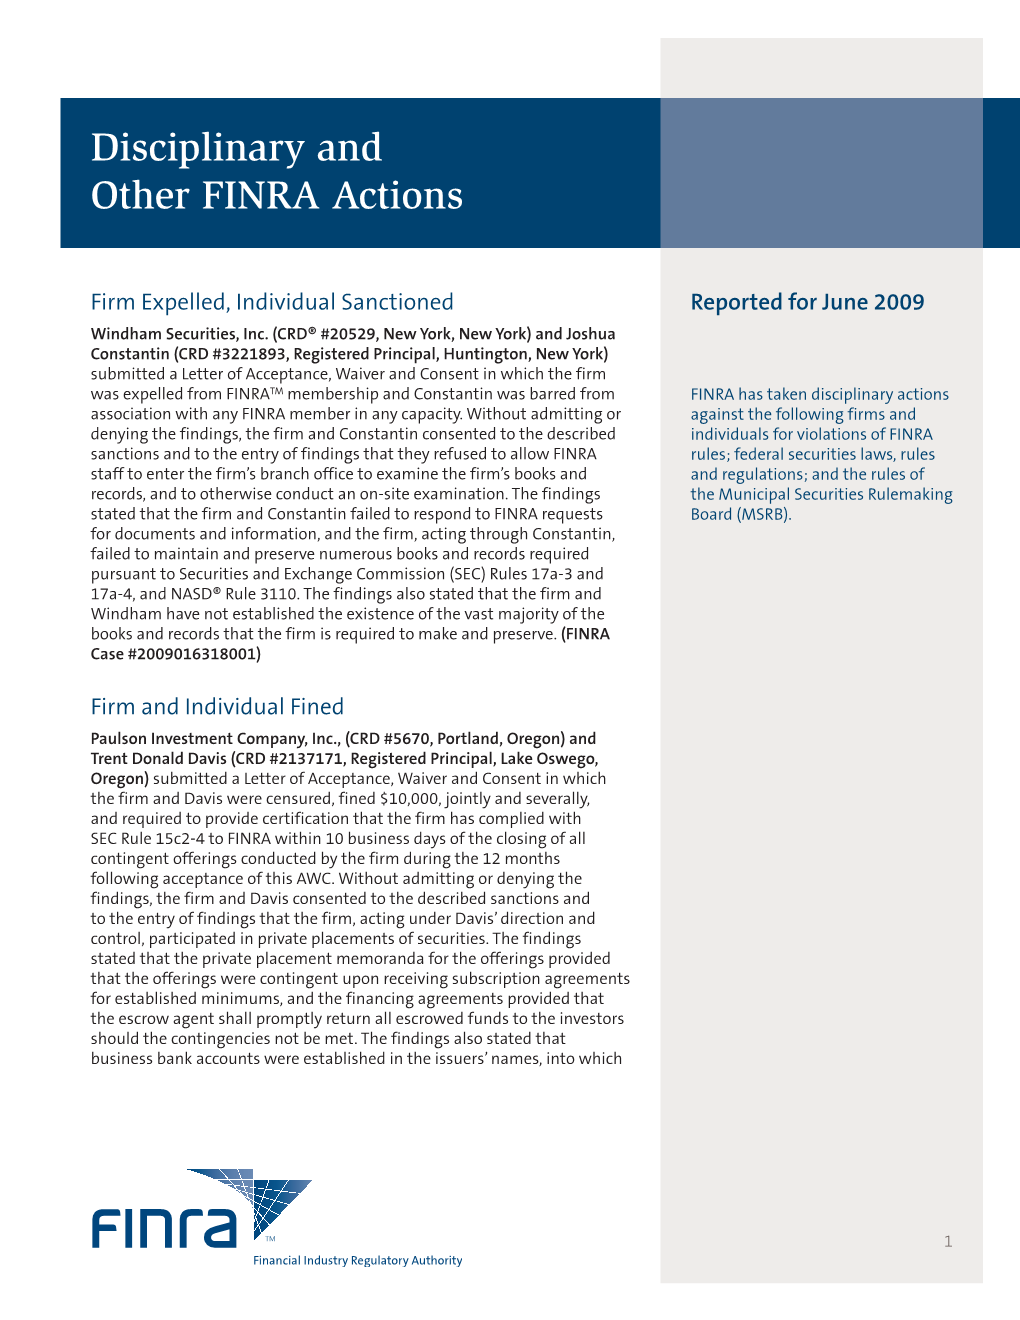 Disciplinary and Other FINRA Actions Reported for June 2009